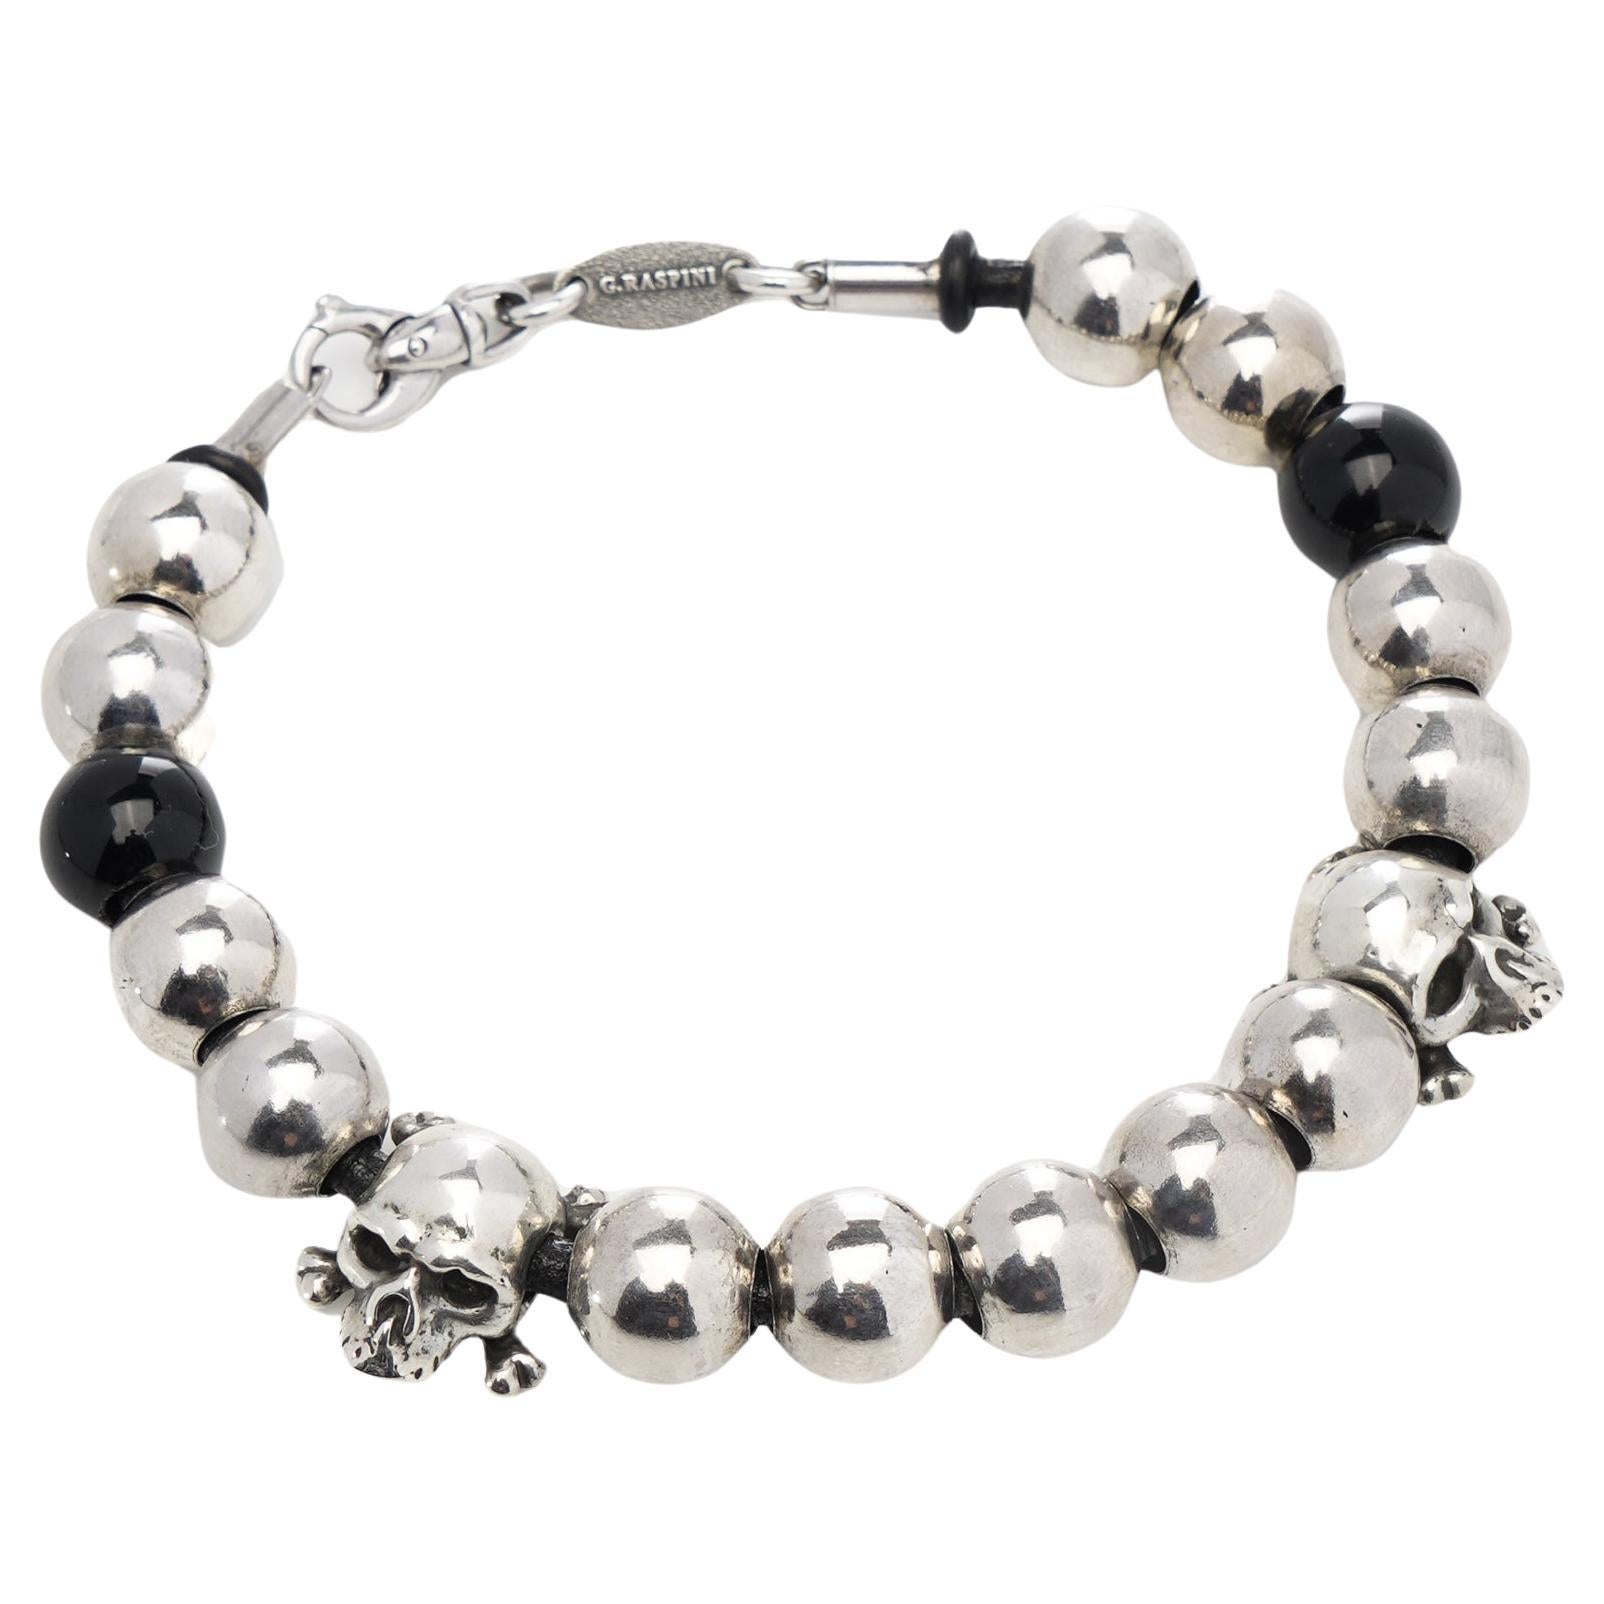 Giovani Raspini sterling 925 silver bead bracelet with skull accents